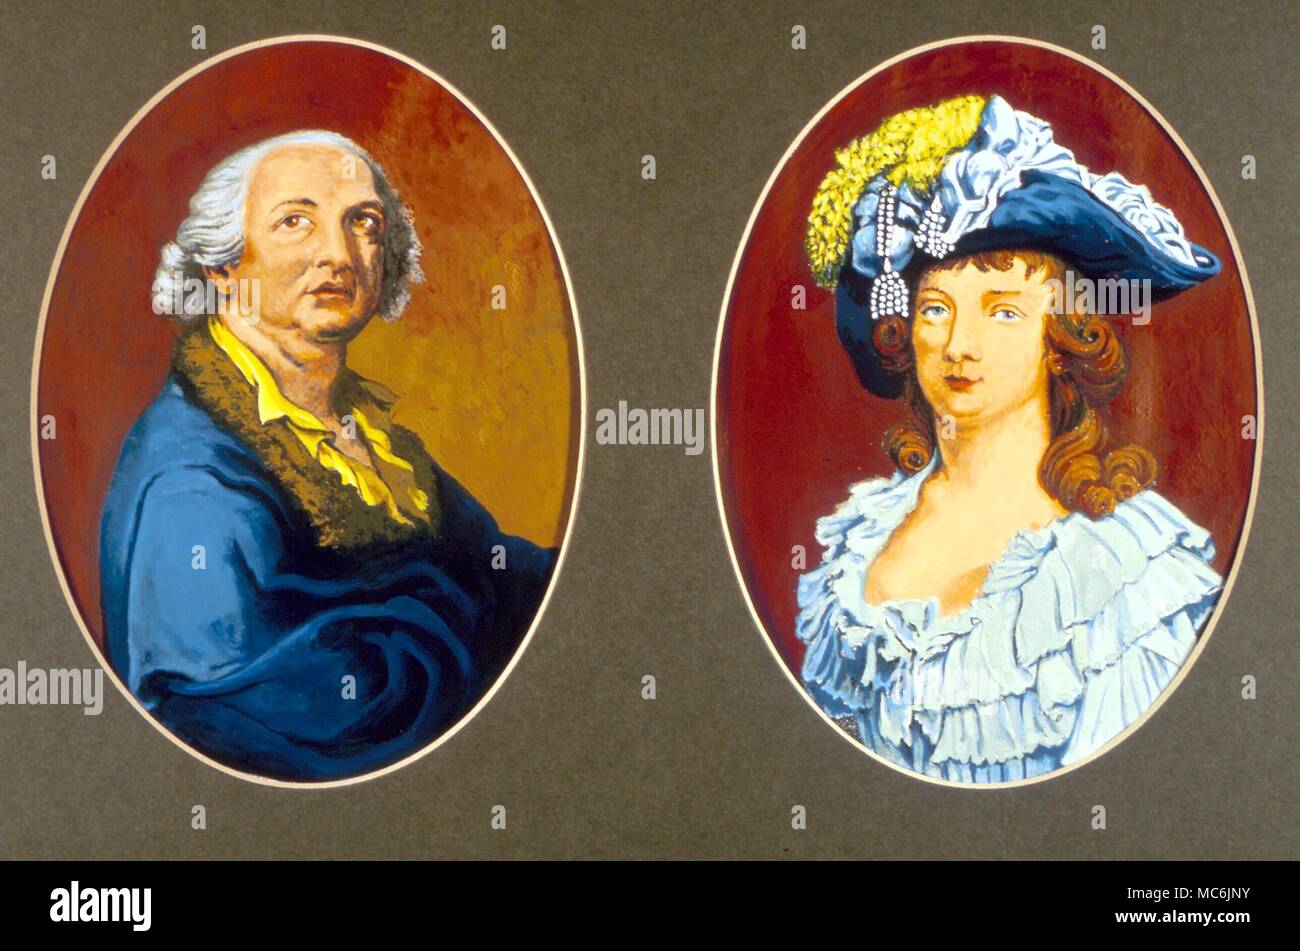 OCCULTISTS - CAGLIOSTRO AND HIS WIFE. Portrait miniatures of Count Alessandro Cagliostro (1743-1795?) and his wife, the Countess. private collection Stock Photo